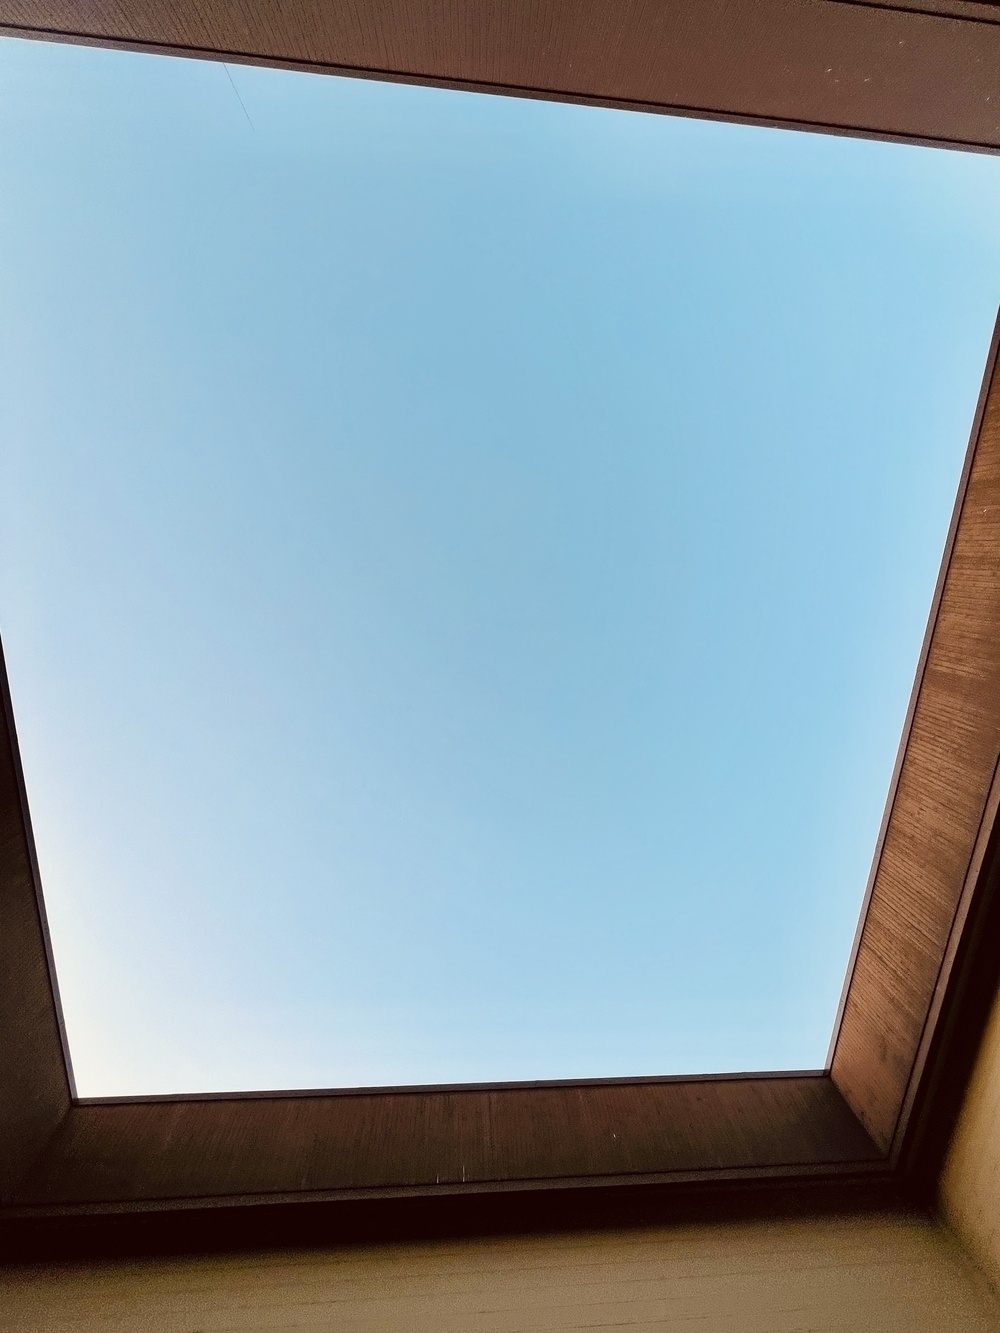 Looking up through the roofs of four buildings that touch each other and sit over four streets. All you can see are the four golden brown wood walls of the roofline, some of the bricks below, and a rectangle of blue sky. 